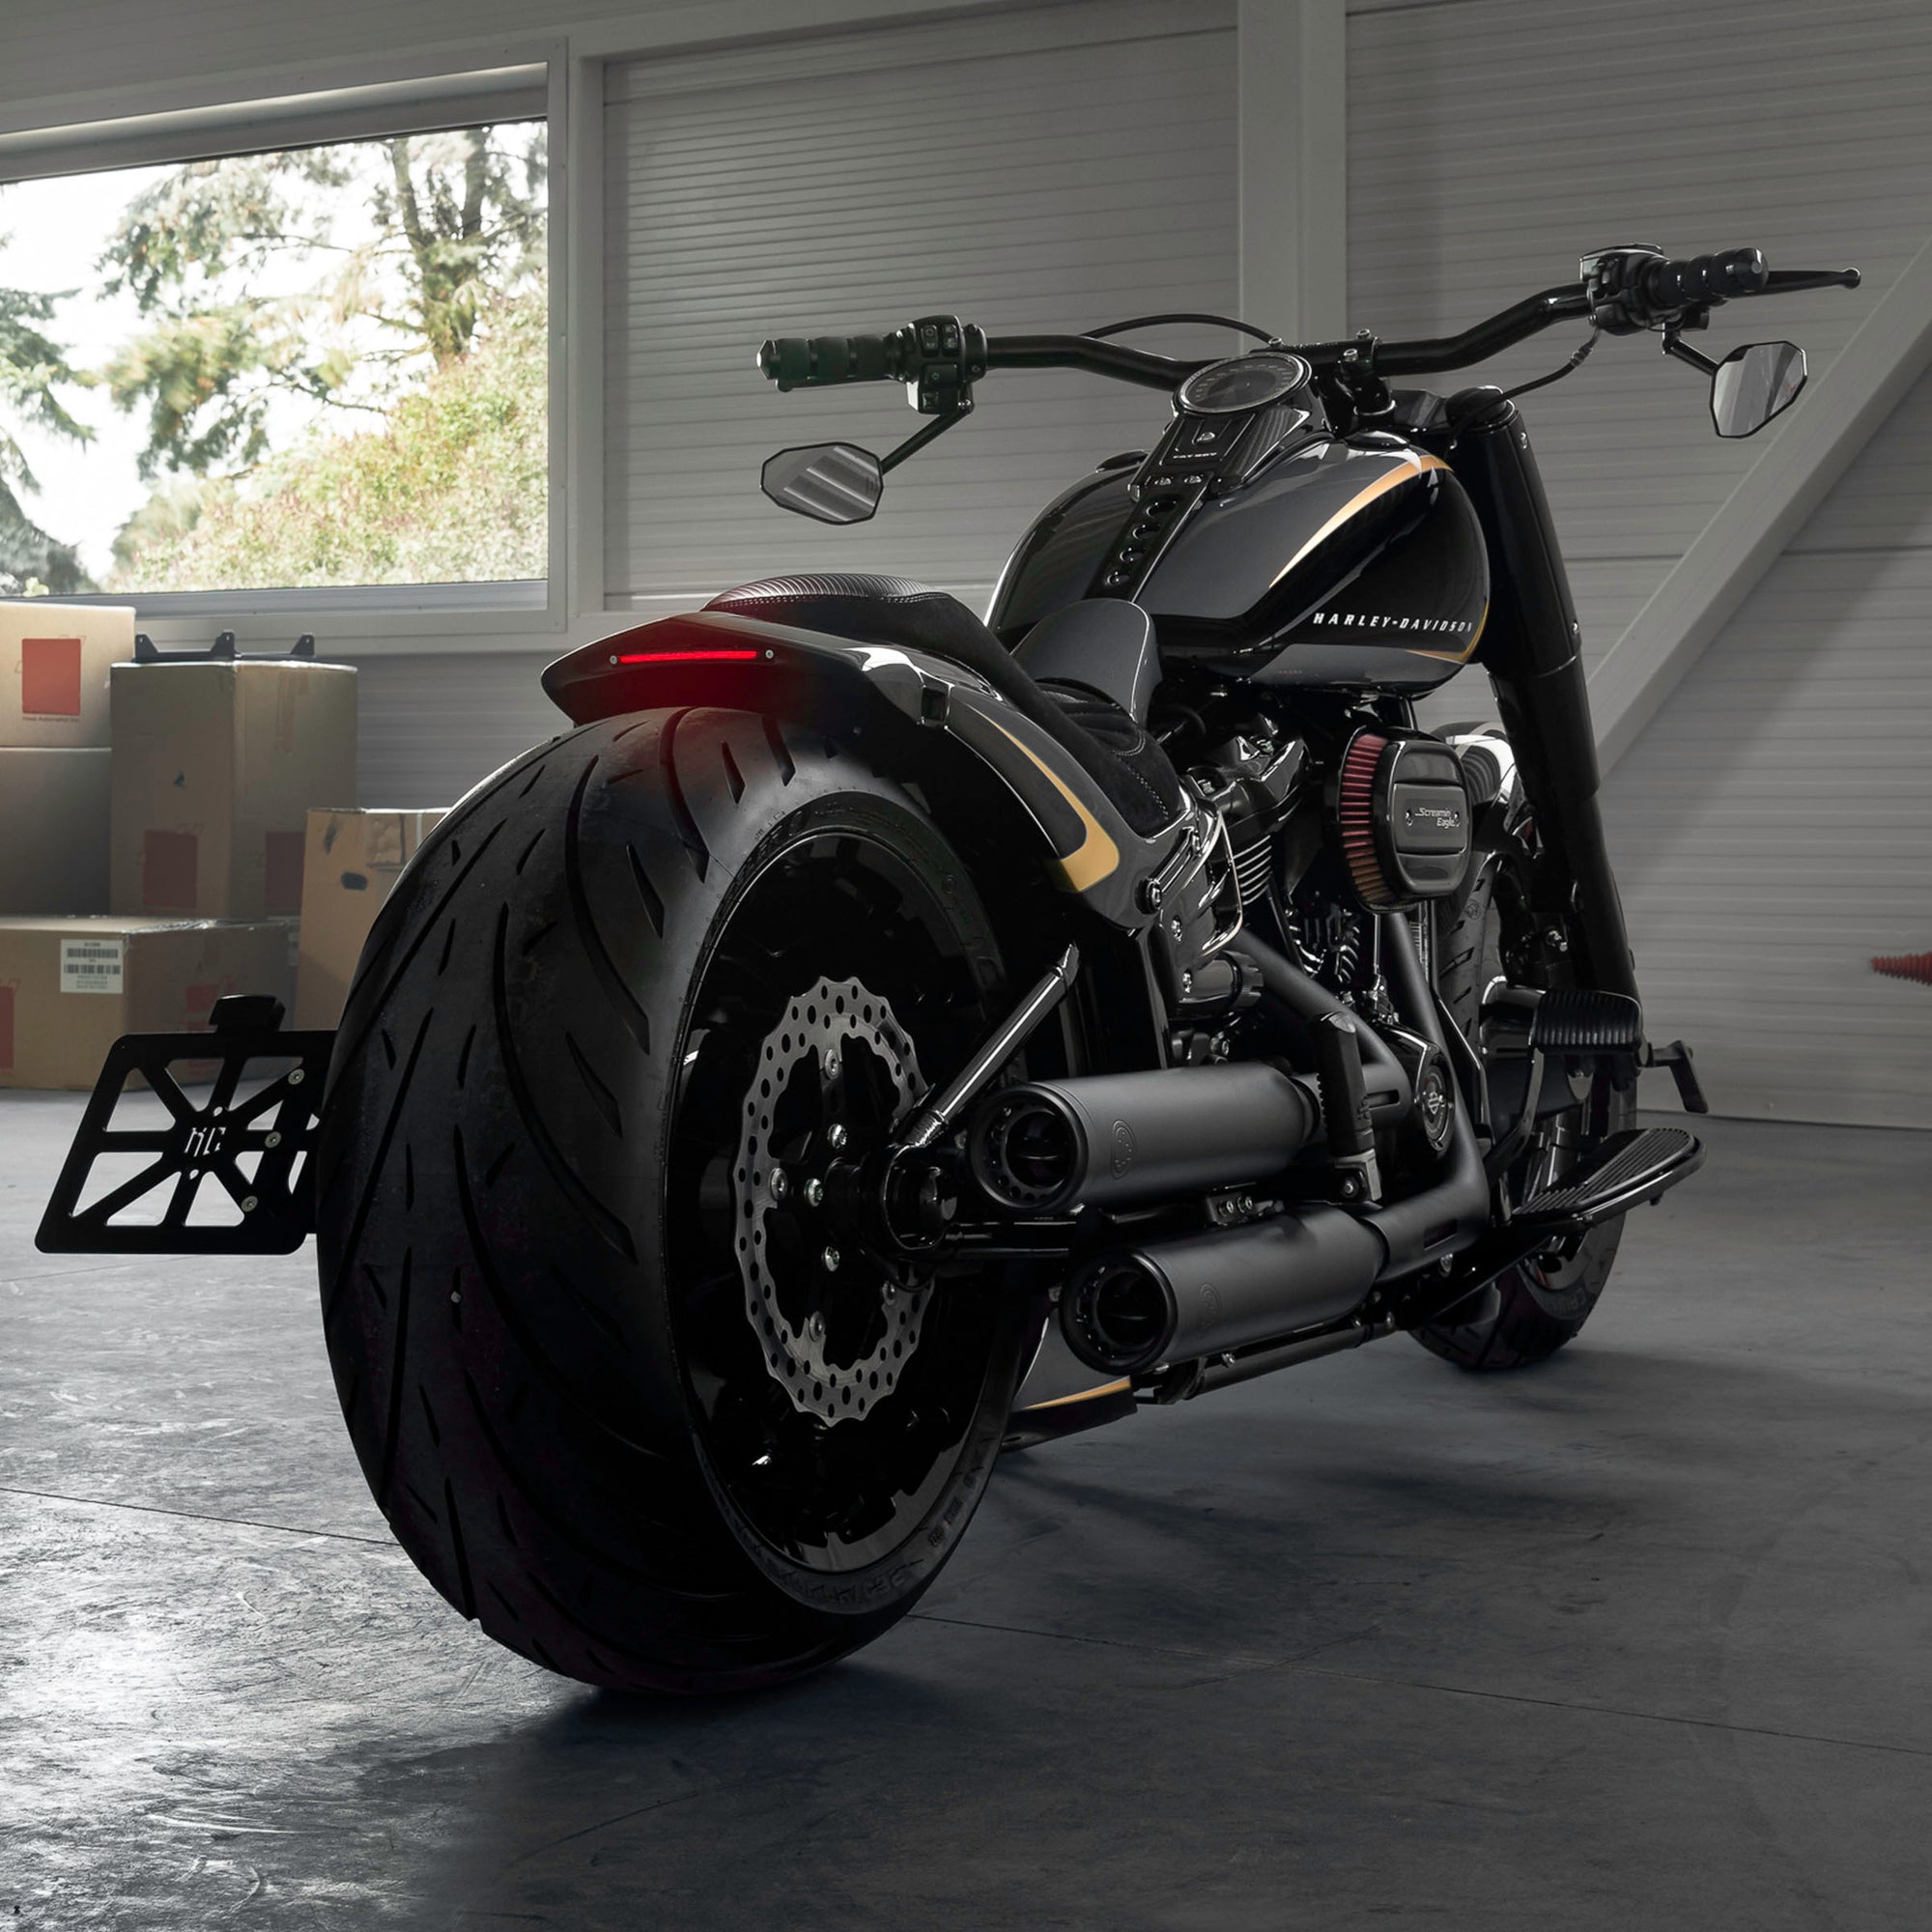 Harley Davidson motorcycle with Killer Custom parts from the rear in a modern garage with some boxes and windows in the background